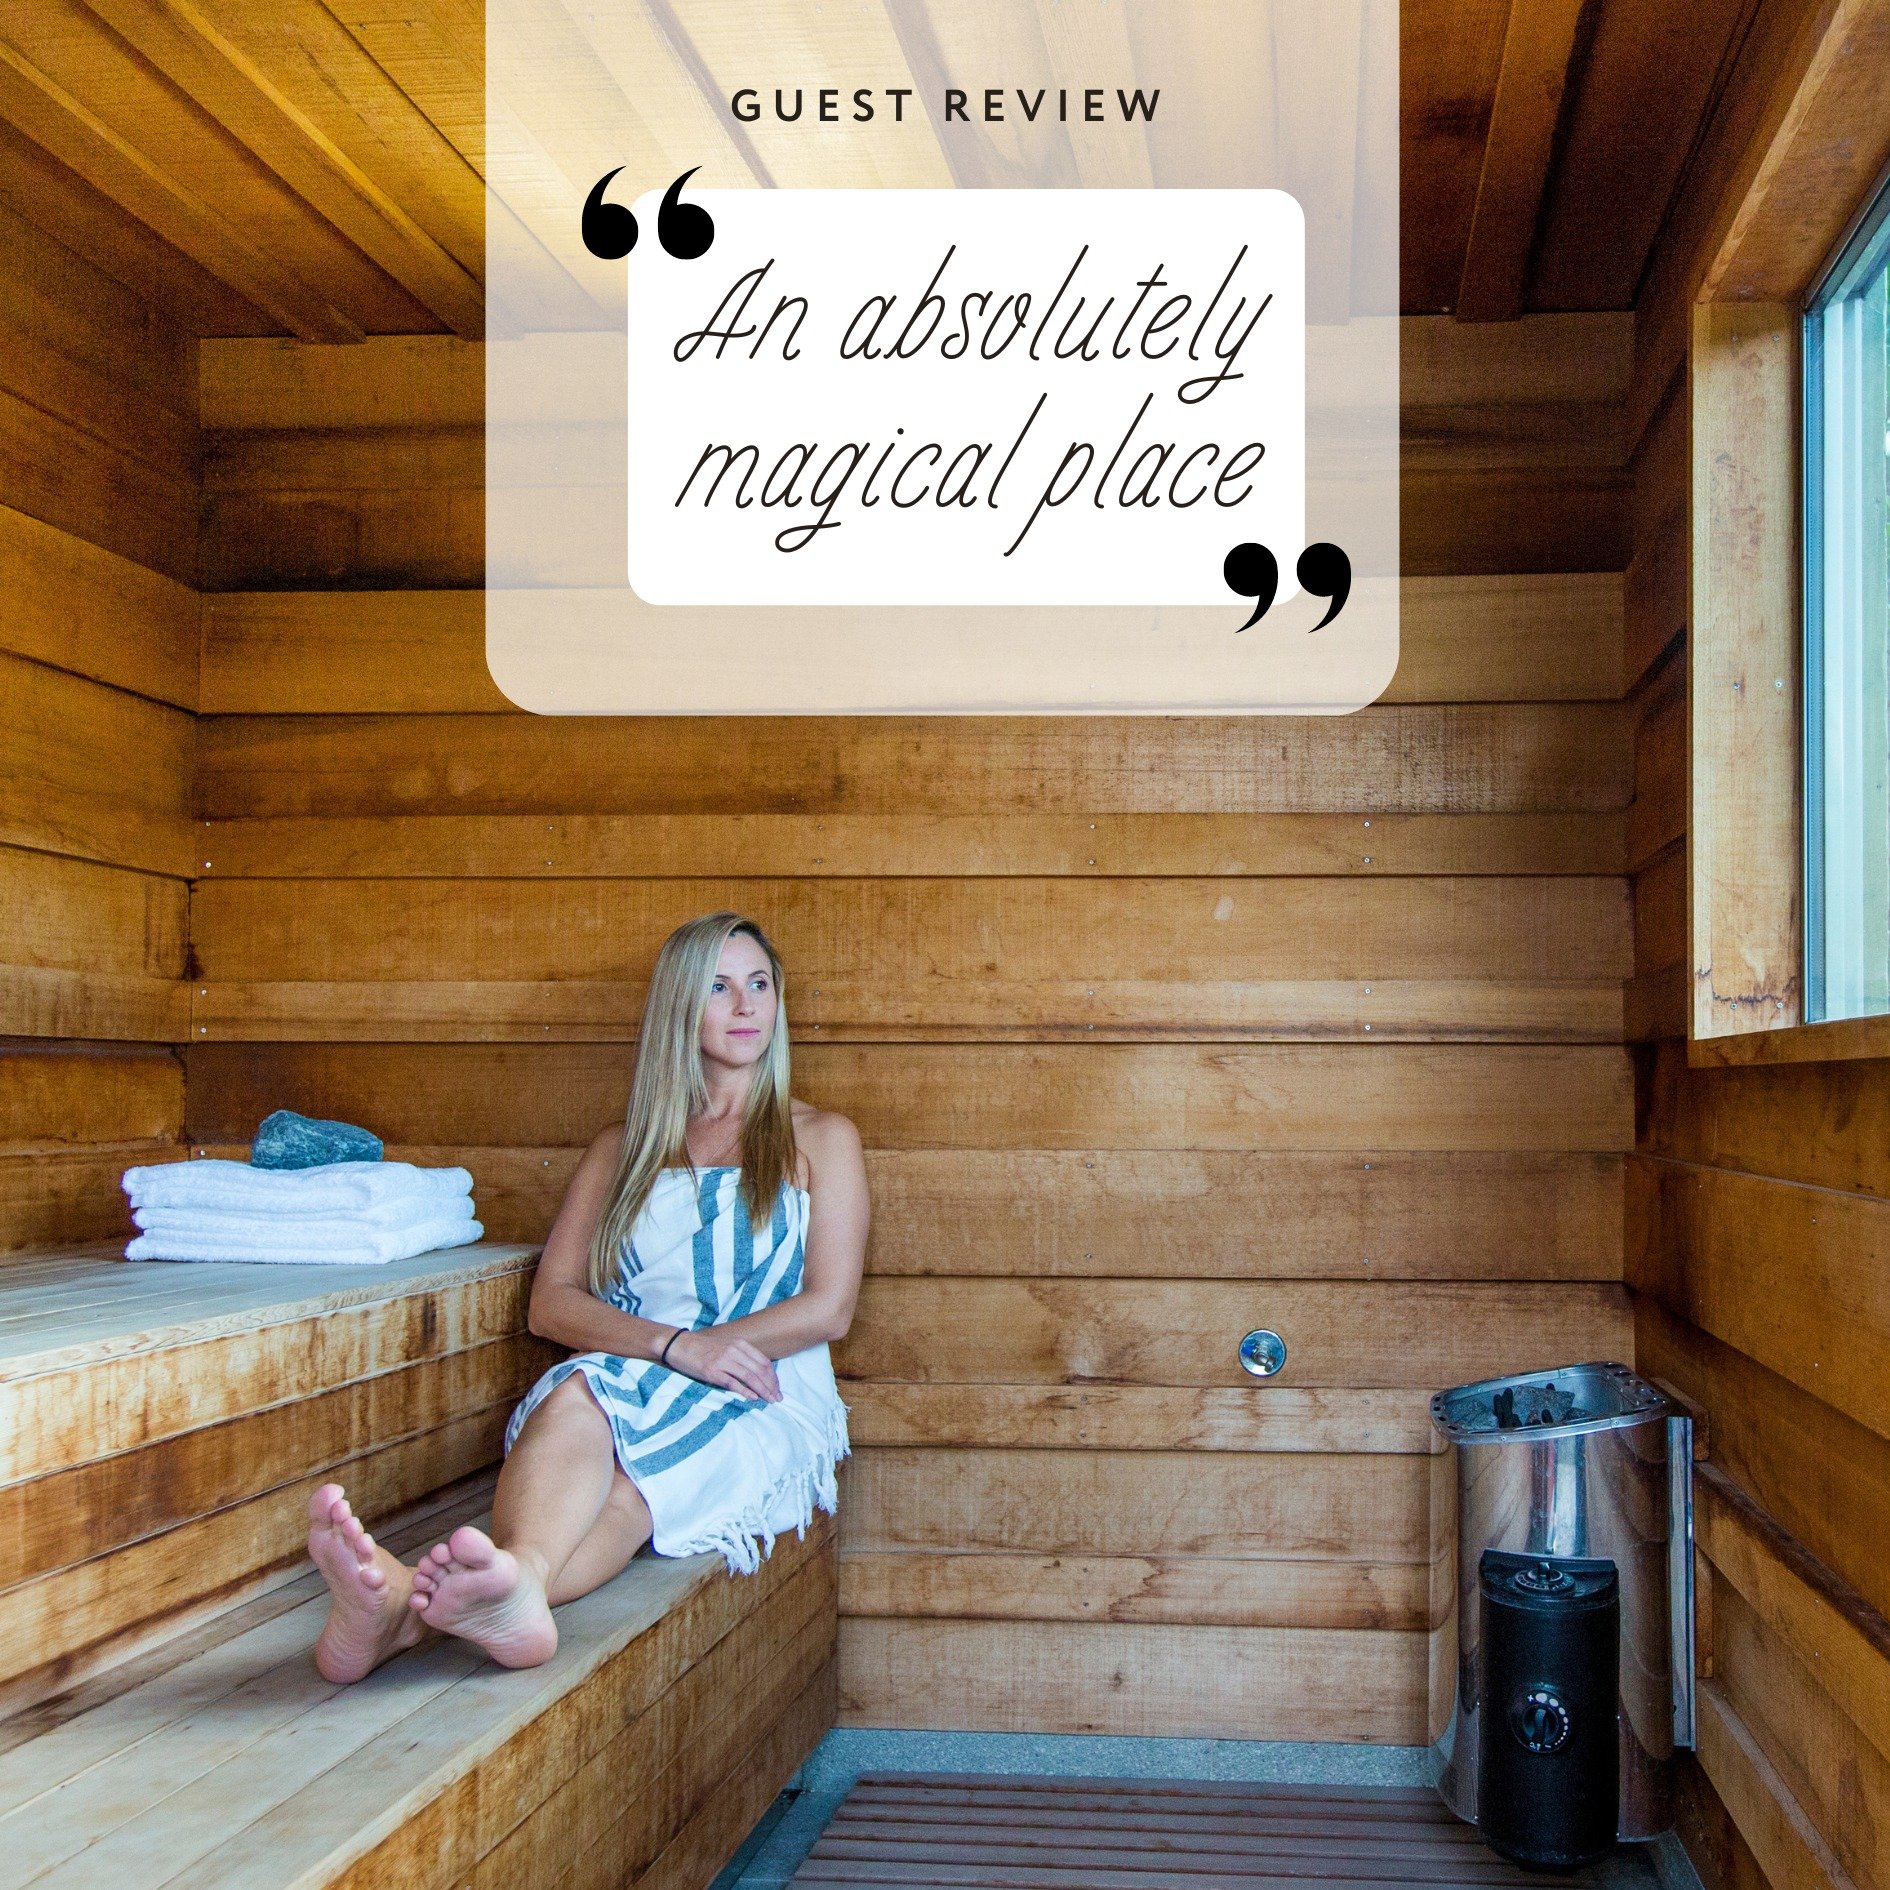 &ldquo;An absolutely magical place.&rdquo;

&ldquo;We had a magnificent stay in one of the Tree Houses and didn't want to leave. Spectacular rooms, views with 'wow'-factor and so many little touches that made it special. Top-tier service, heated pool